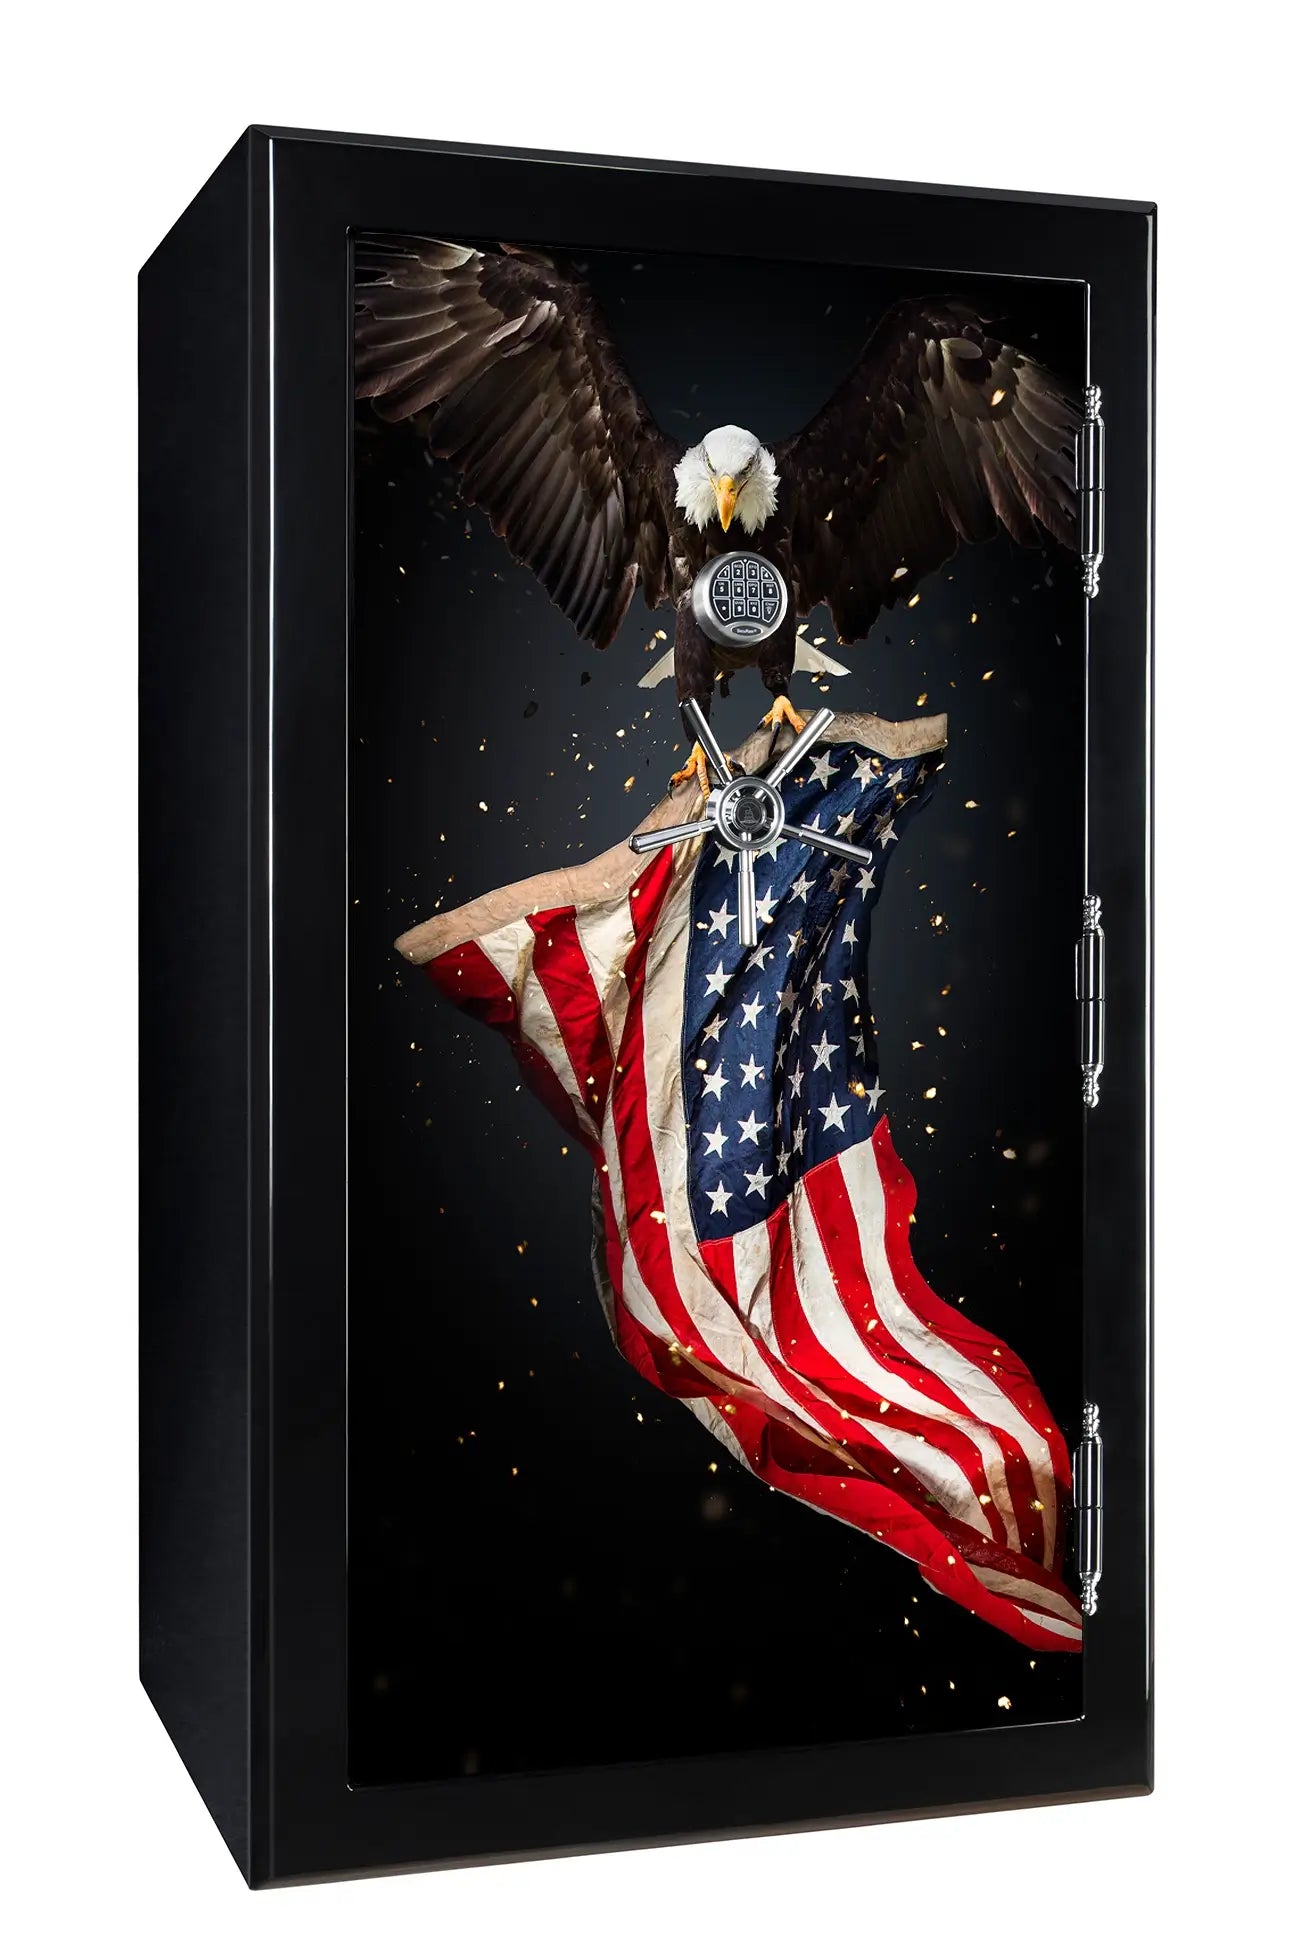 72 inch tall by 42 inch wide Old Glory gun safe locked in gloss black with custom Wings of Freedom graphic design